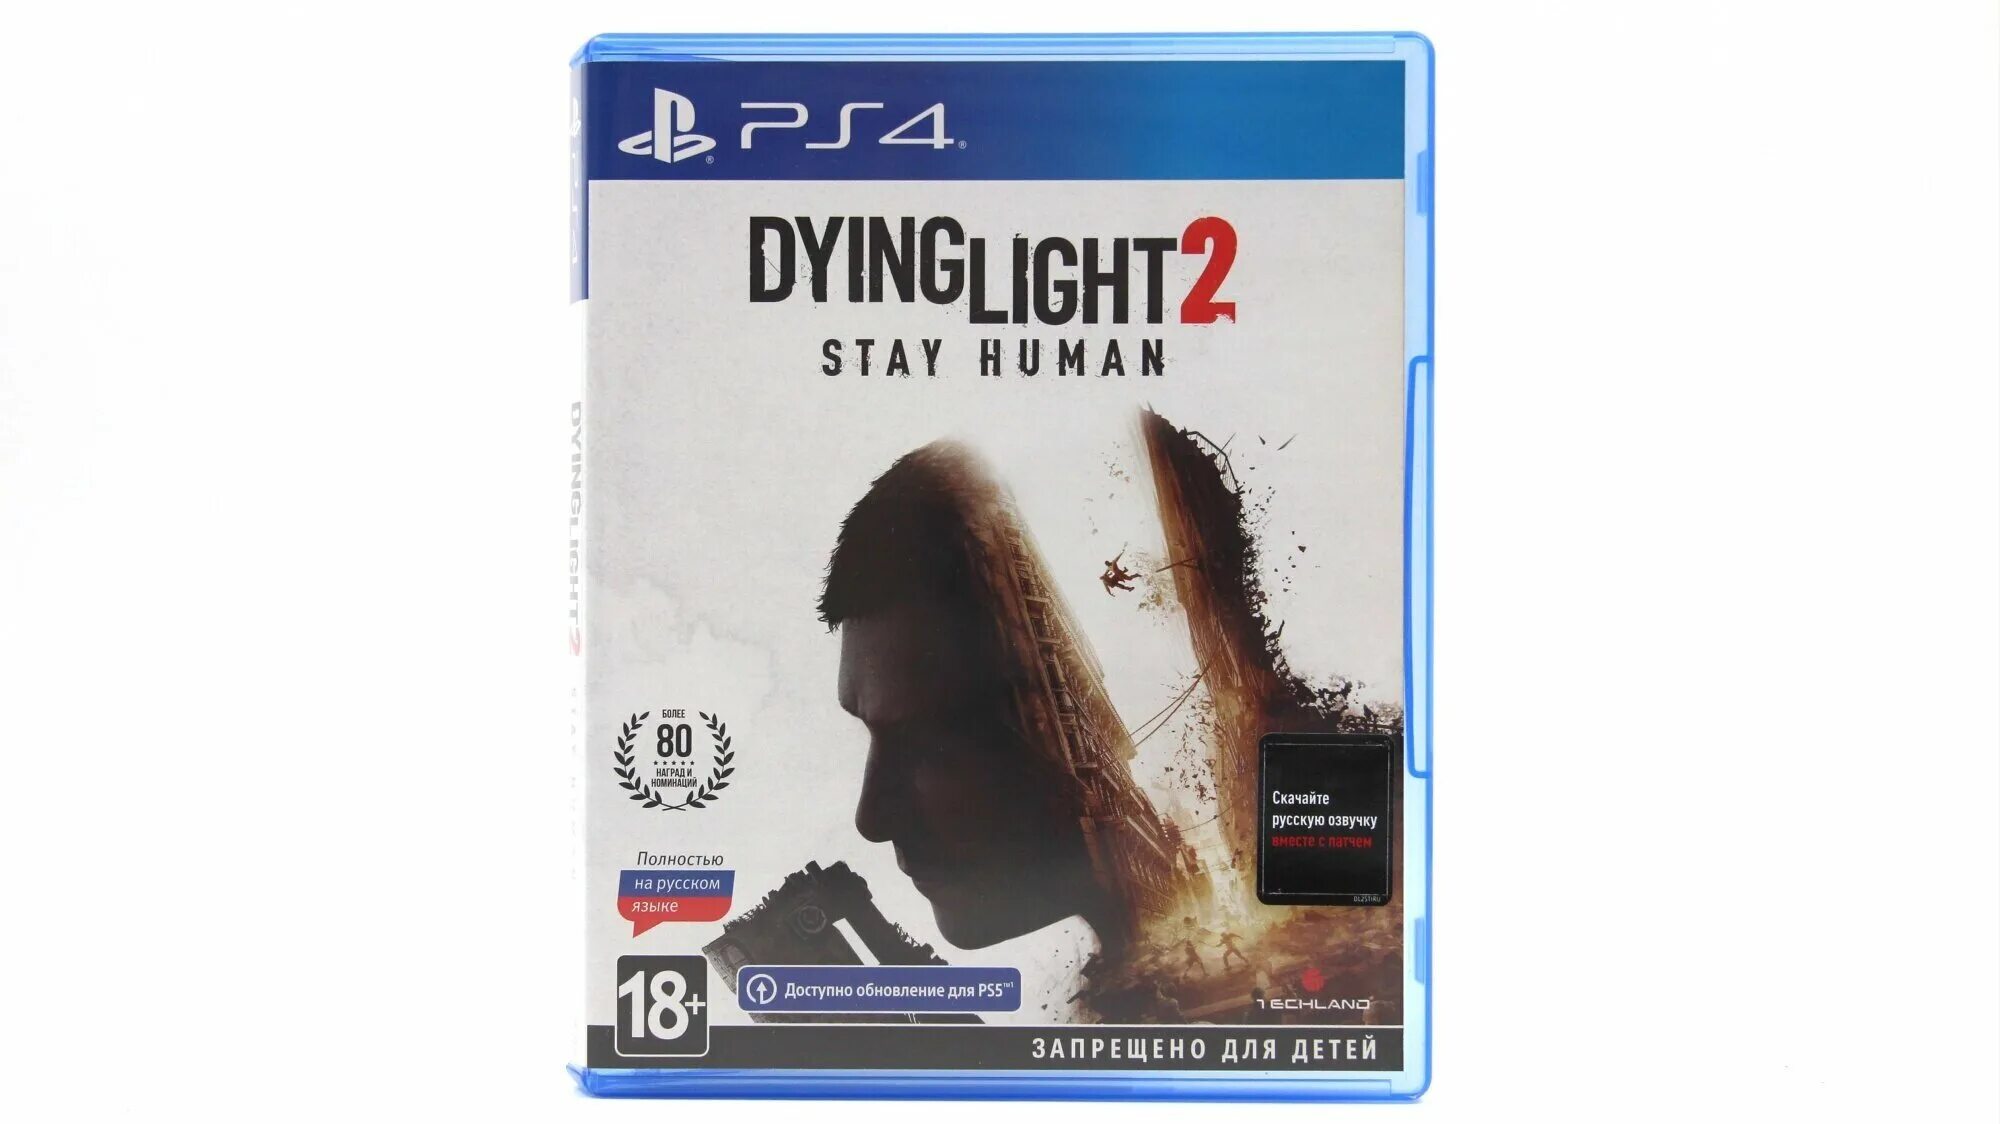 Dying Light 2 stay Human [ps4, русская версия]. Dying Light 2: stay Human Ultimate Edition ps4. Dying Light 2 stay Human обложка. Stay human отзывы